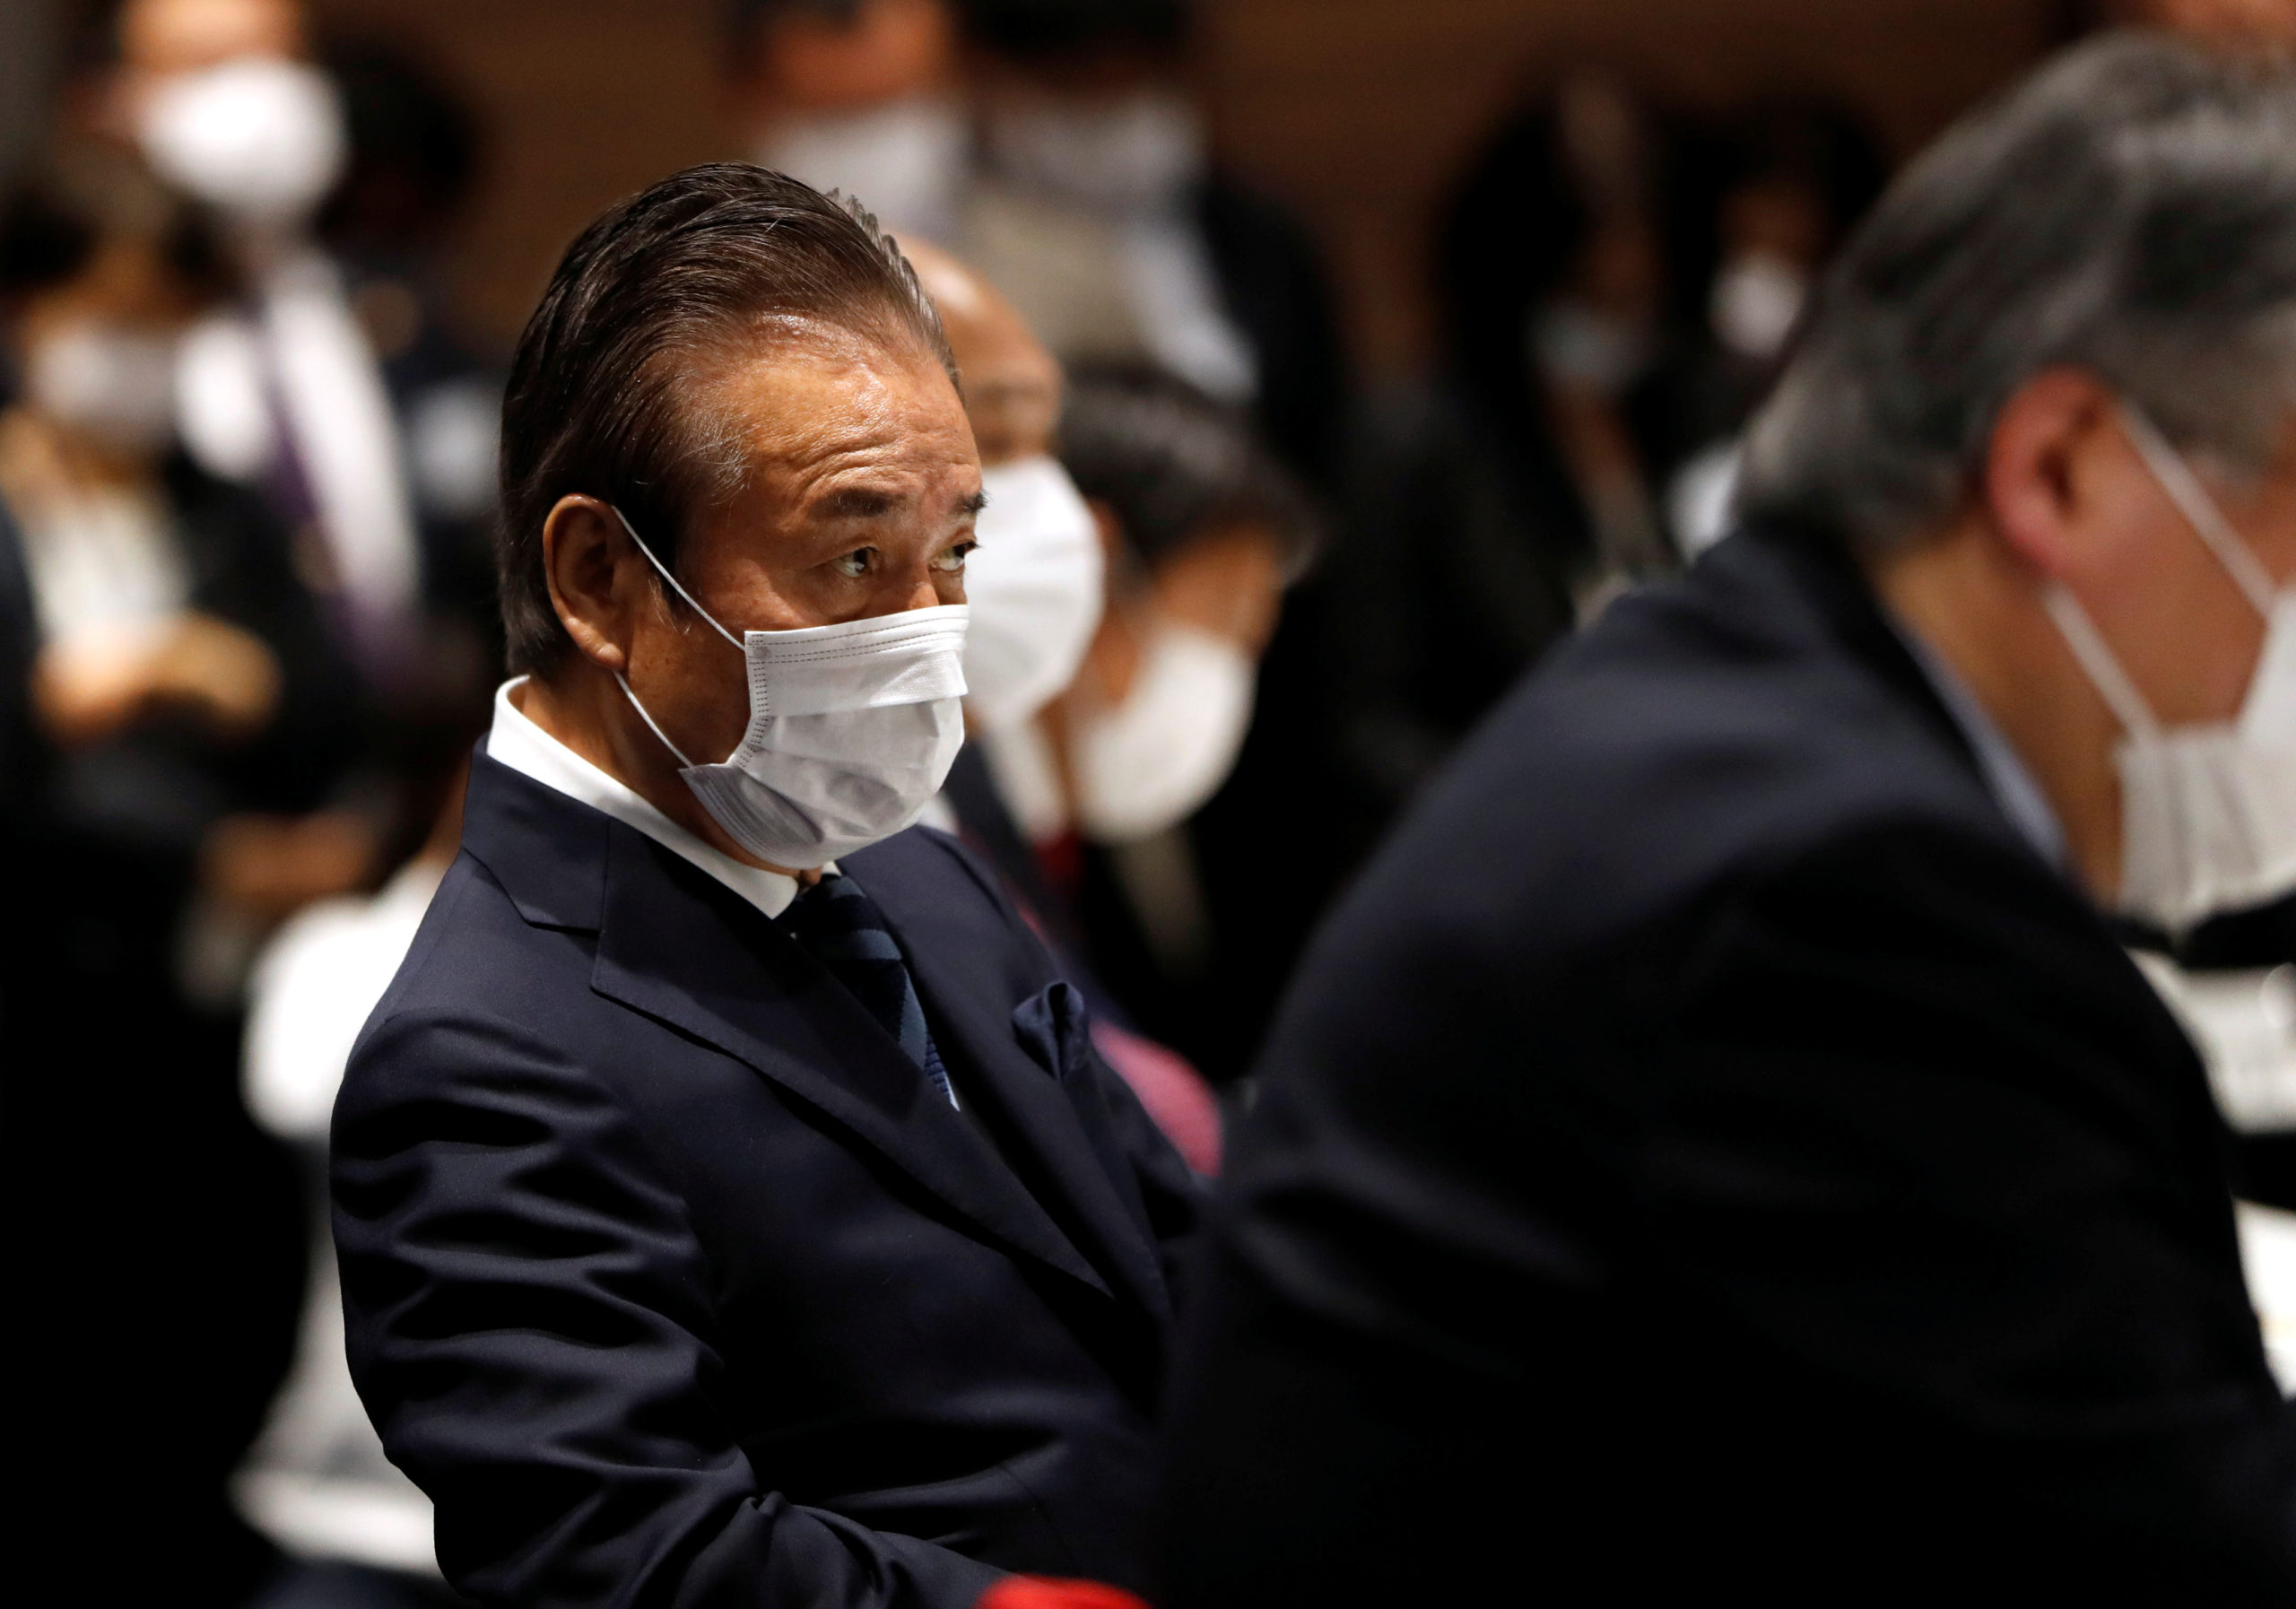 FILE PHOTO: The Tokyo Organising Committee of the Olympic and Paralympic Games (Tokyo 2020) Executive Board member Haruyuki Takahashi, wearing a protective face mask following an outbreak of the coronavirus disease (COVID-19), is seen during Tokyo 2020 Executive Board Meeting in Tokyo, Japan March 30, 2020.